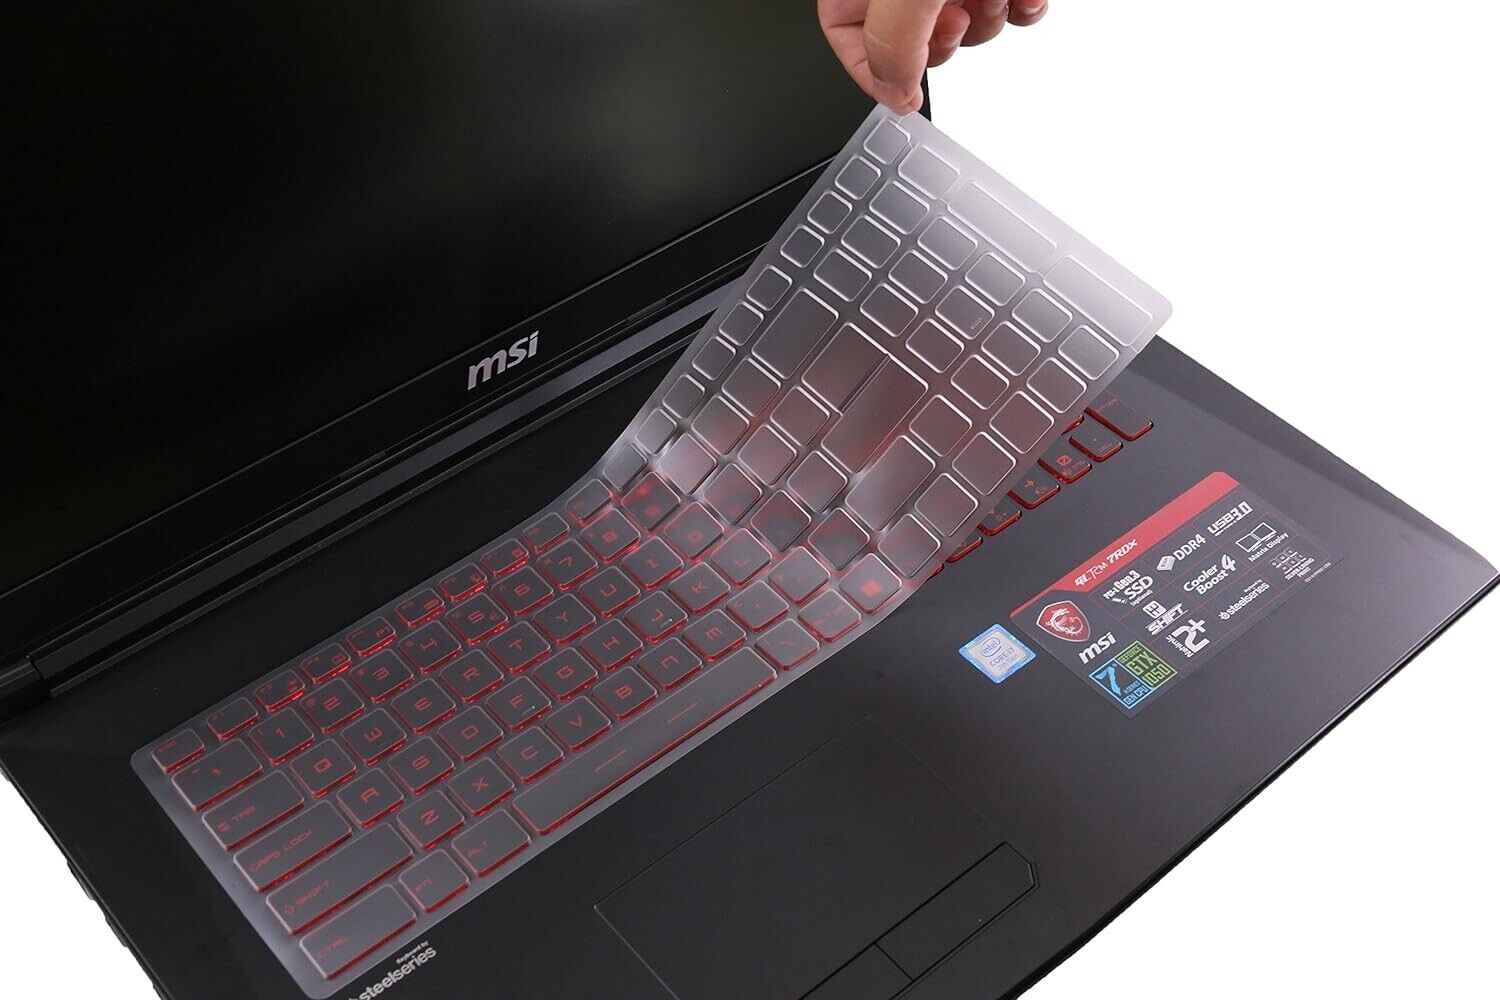 Keyboard Cover For MSI Gaming Laptops Fits A Wide Range Of US Version Models New